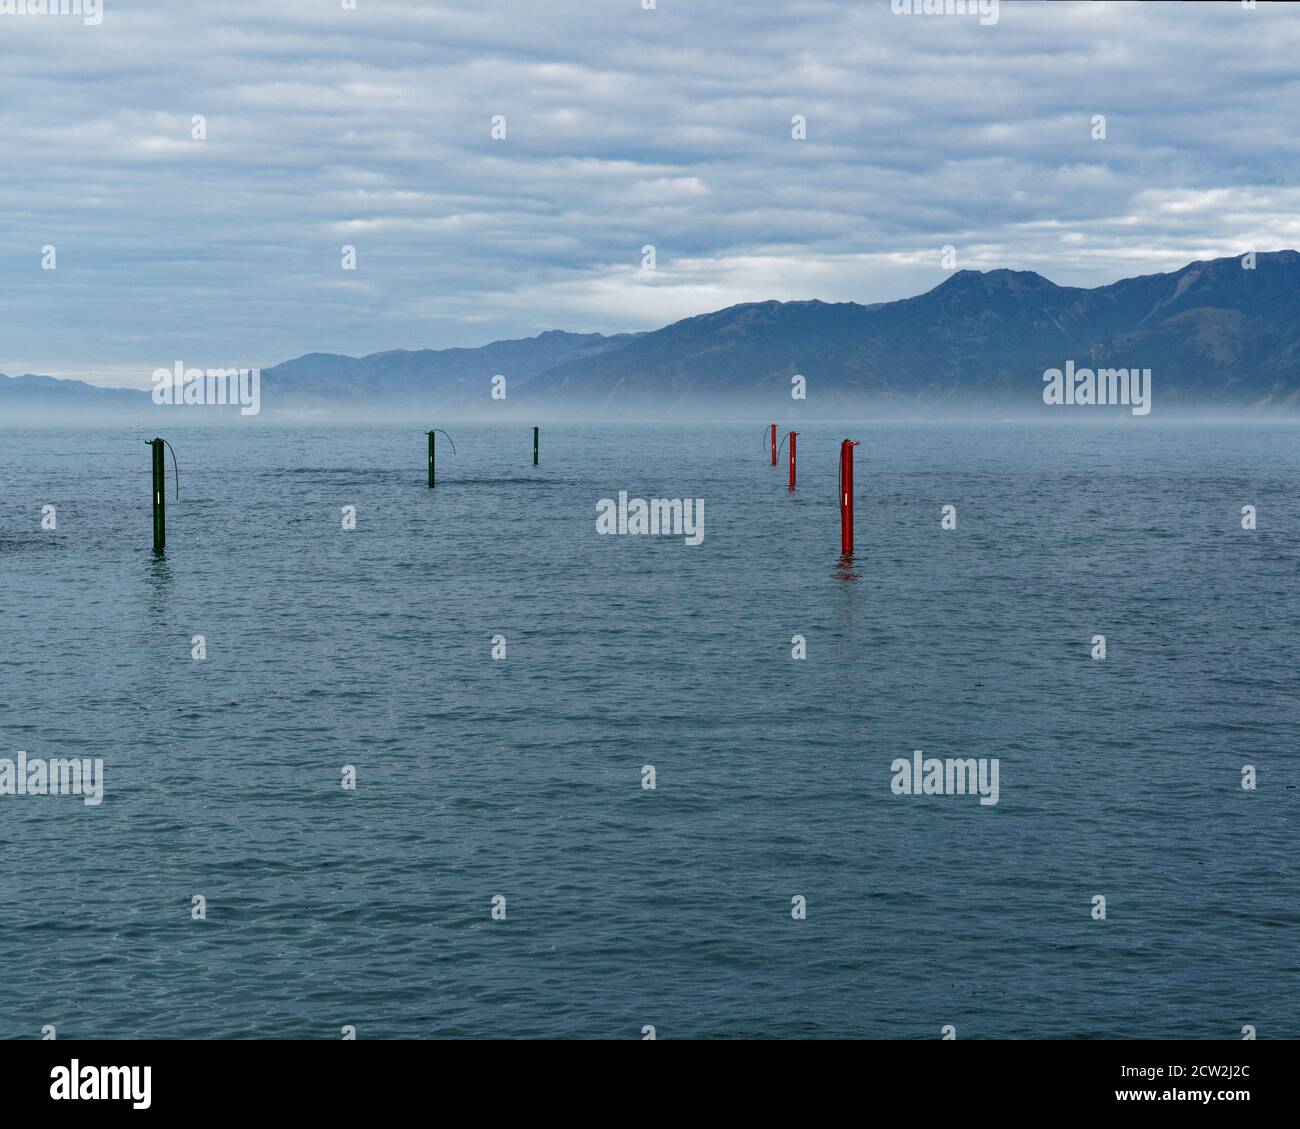 South Bay harbour, entrance and exit marker poles, Kaikoura, south island, New Zealand. Stock Photo